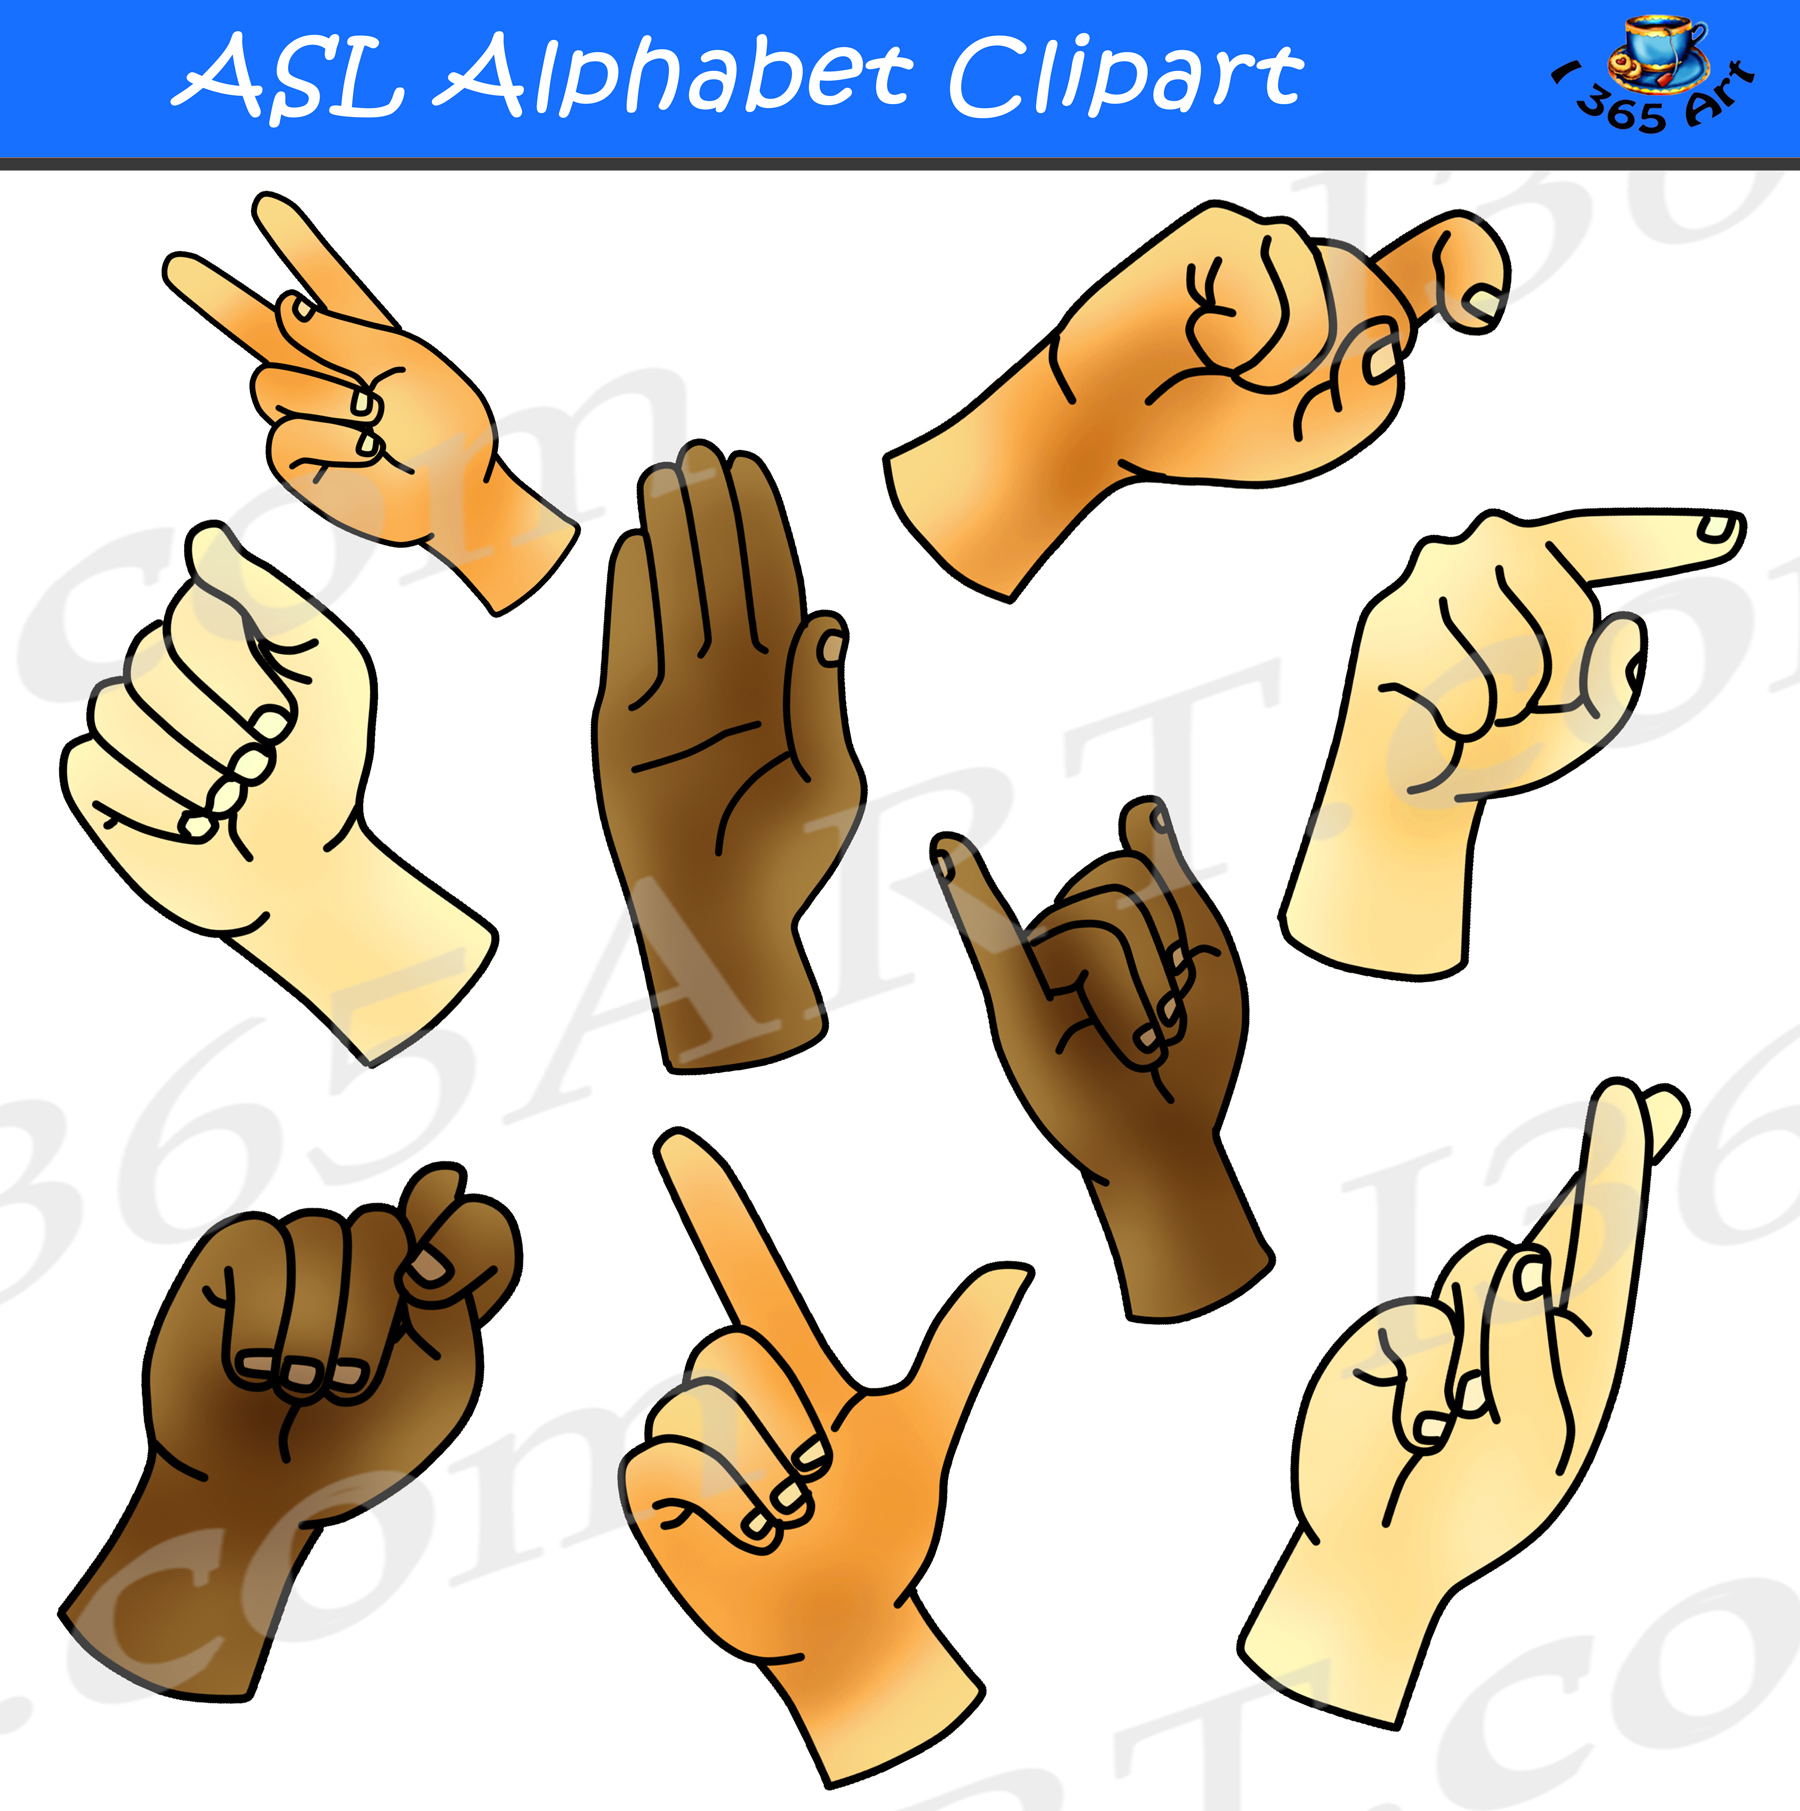 Sign Language Clipart Asl and other clipart images on Cliparts pub ™.